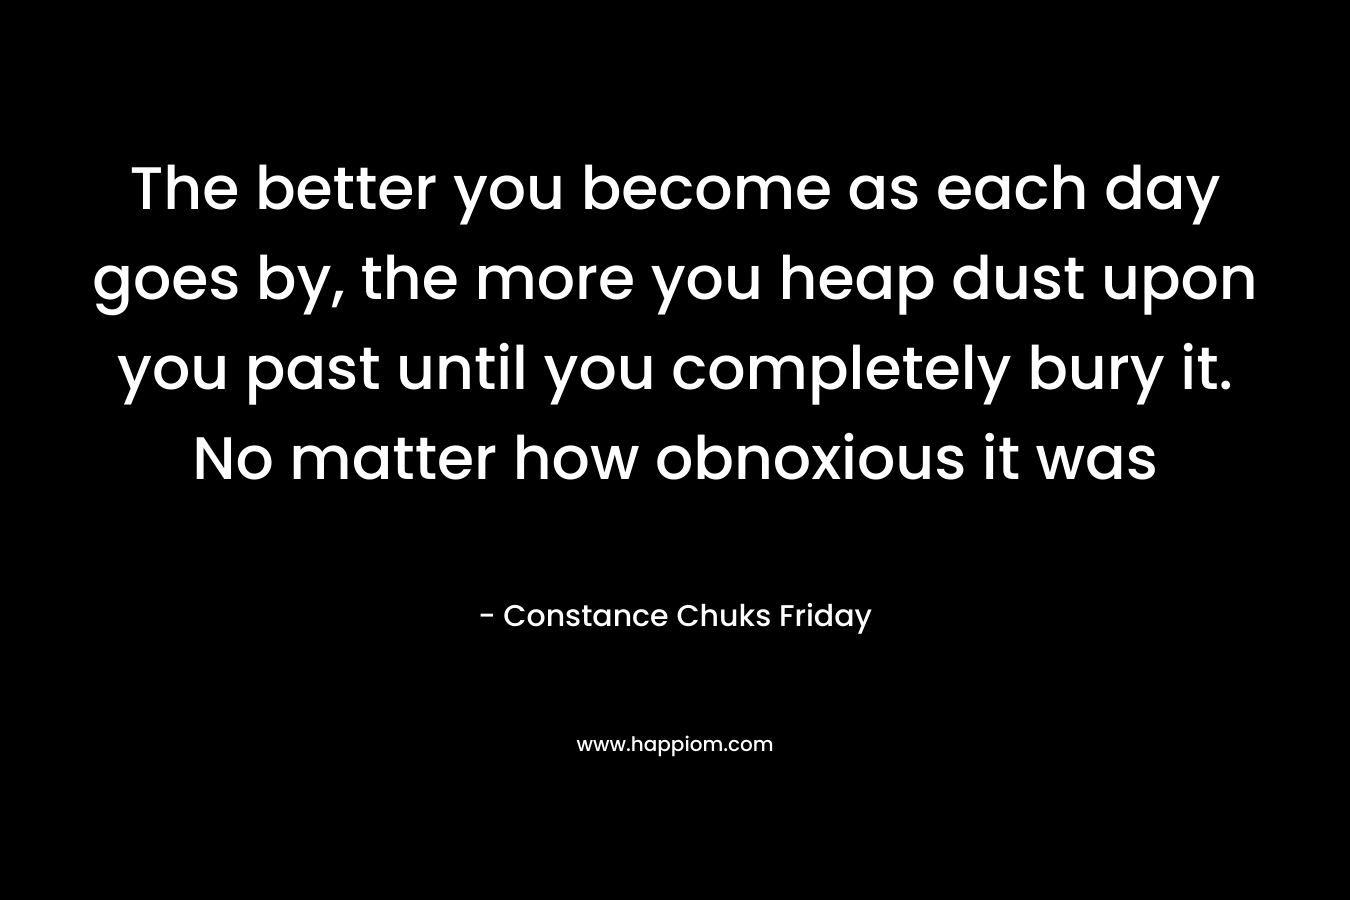 The better you become as each day goes by, the more you heap dust upon you past until you completely bury it. No matter how obnoxious it was